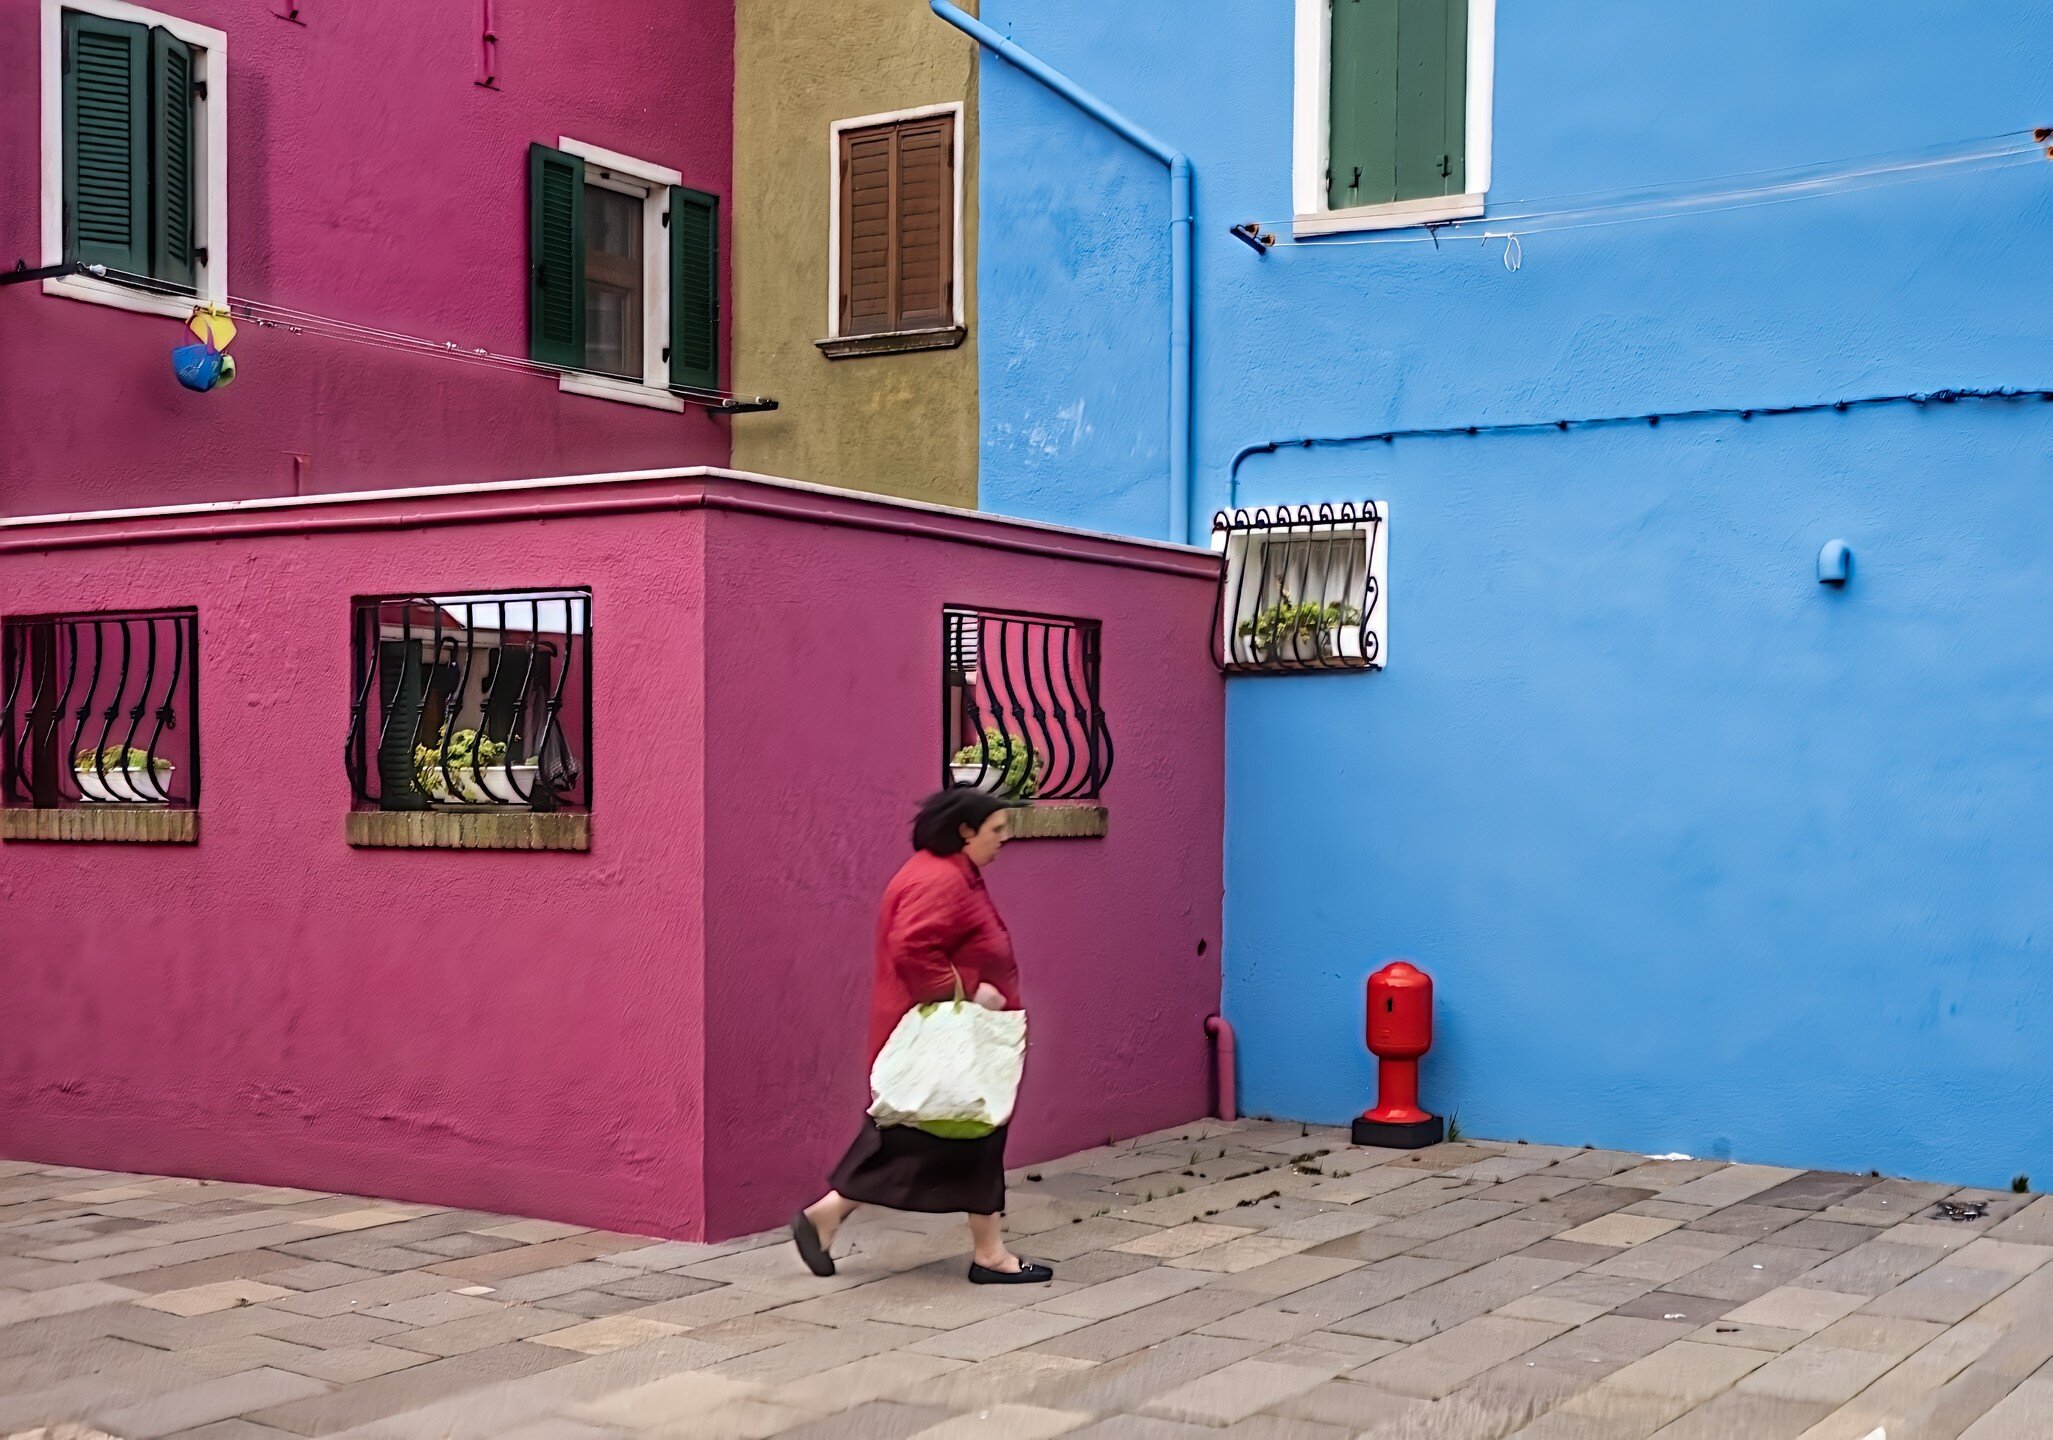 Traditionally captured through the lens of monochrome in my workshops, Burano's palette bursts to life in this rare departure from black and white. A local woman, clothed in a red that mirrors the vivid walls, carries the day's shopping, adding a pul